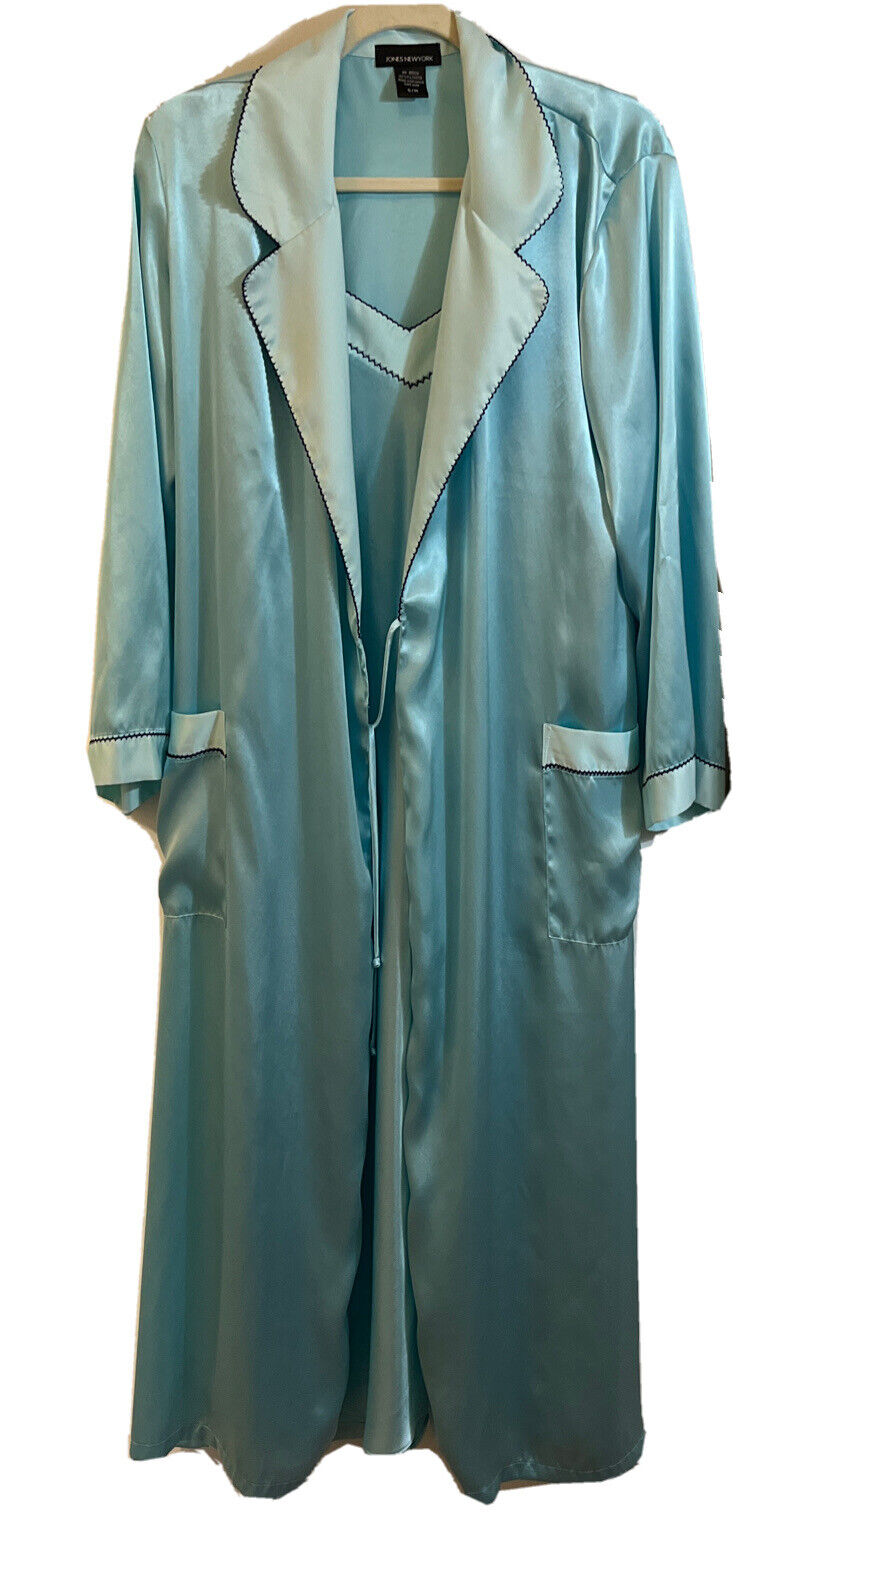 Jones New York Icey Blue Nightgown And Robe Set Size Small Rn 65539 | eBay